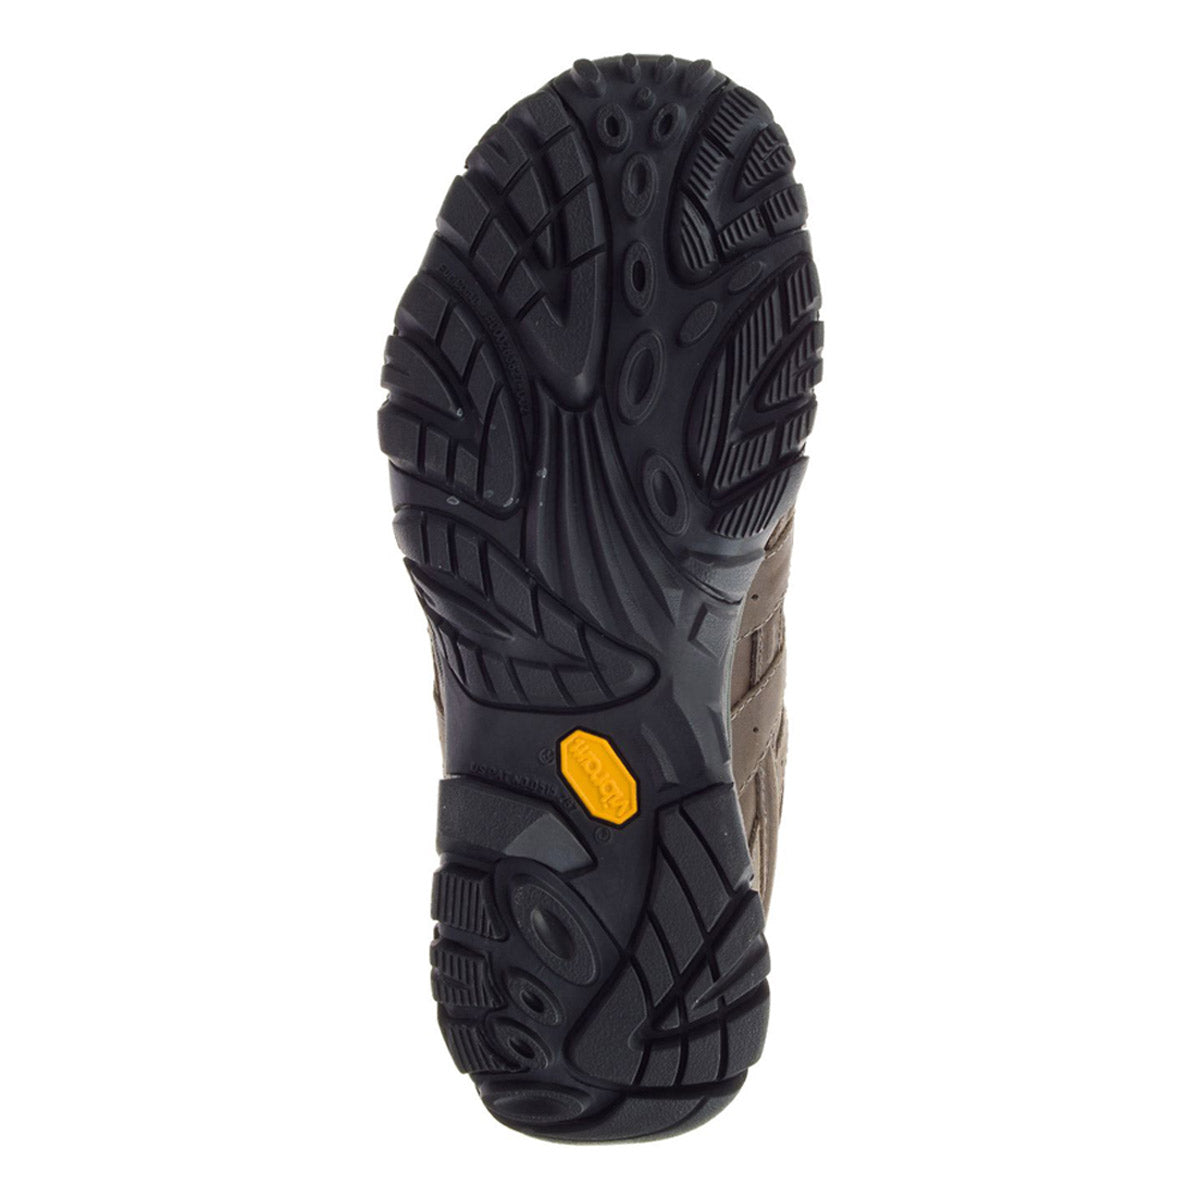 A photo showcasing the sole of a Merrell waterproof hiking shoe with a black Vibram TC5+ tread pattern and a small yellow logo.